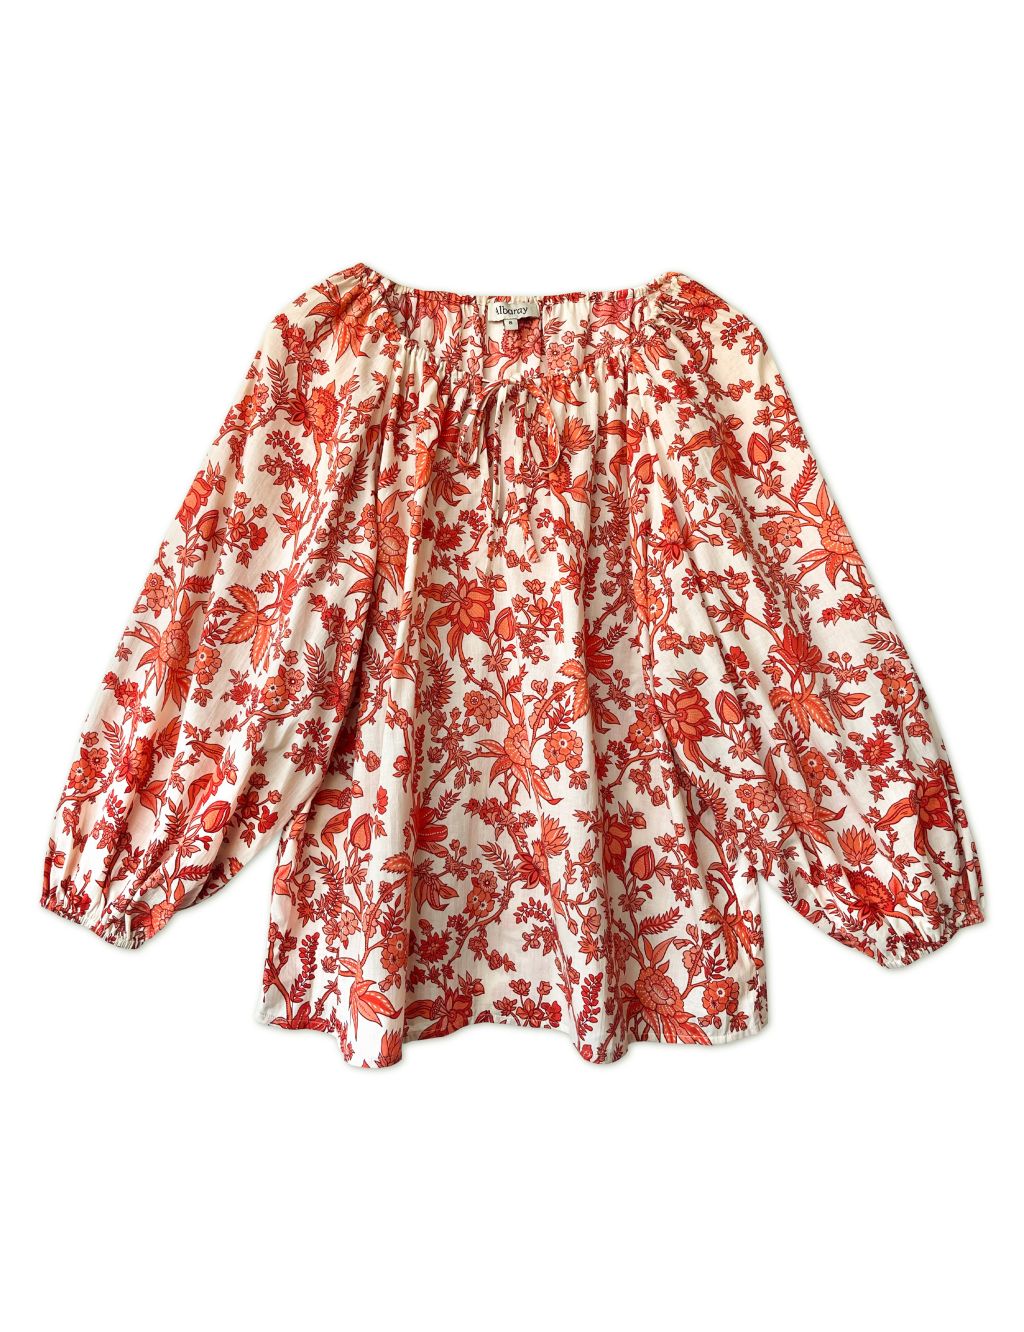 Organic Cotton Floral Puff Sleeve Blouse image 2